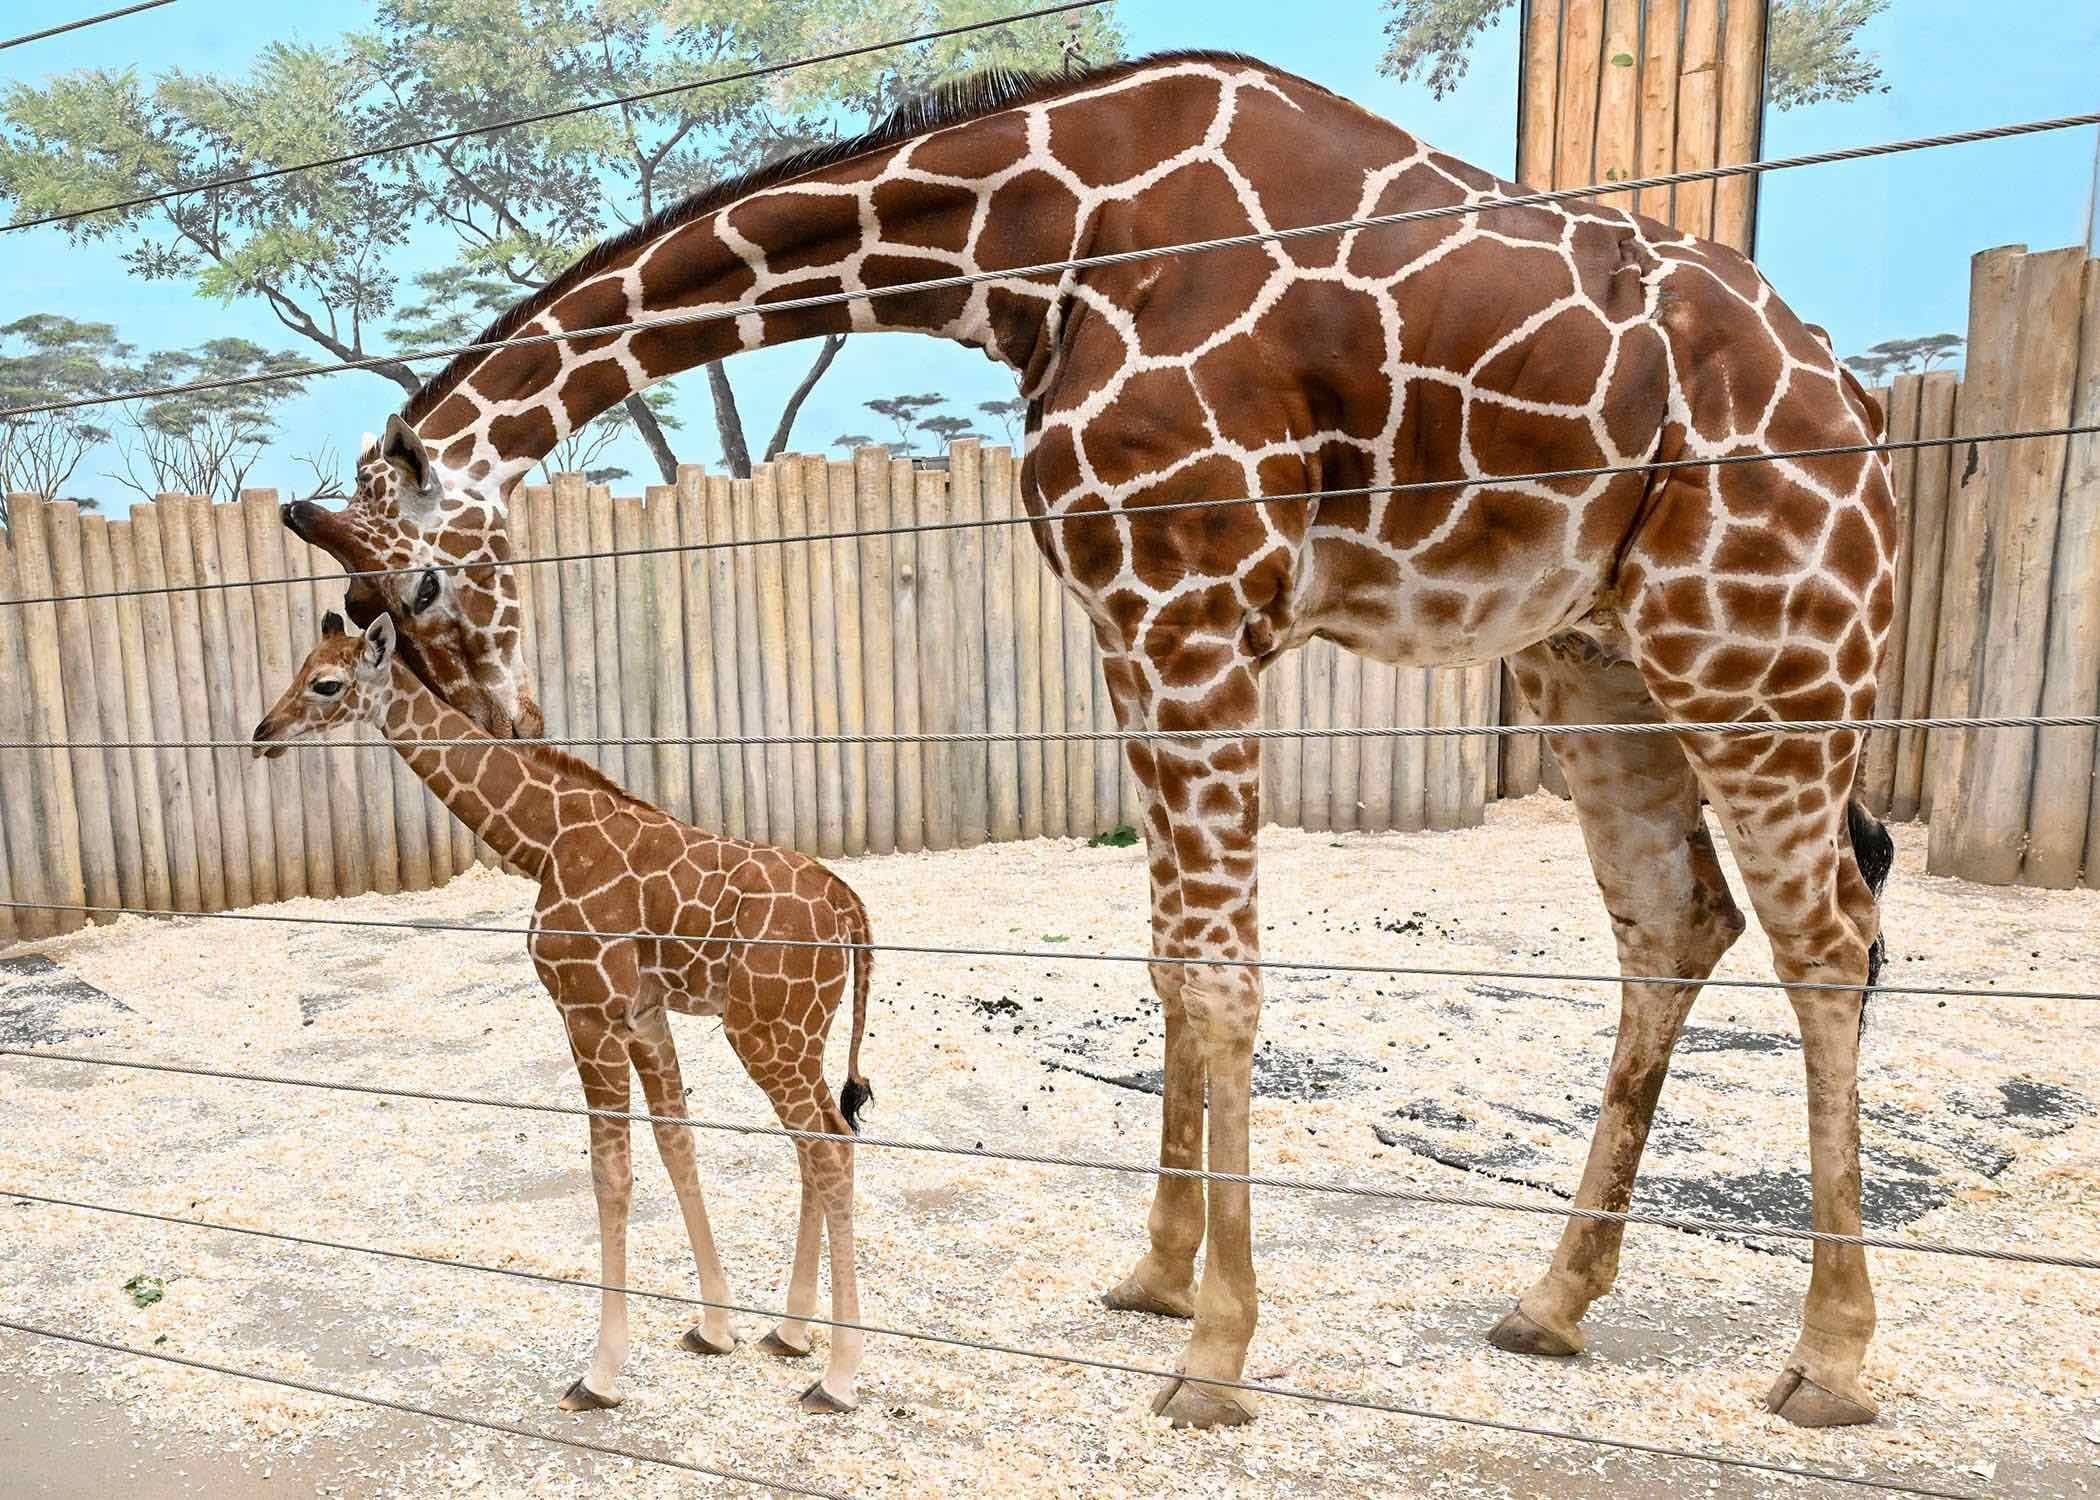 Thanks to innovative fertility treatment, 16-year-old Arnieta successfully gave birth to Kinda after suffering a pair of miscarriages in recent years. (Jim Schulz / CZS-Brookfield Zoo)